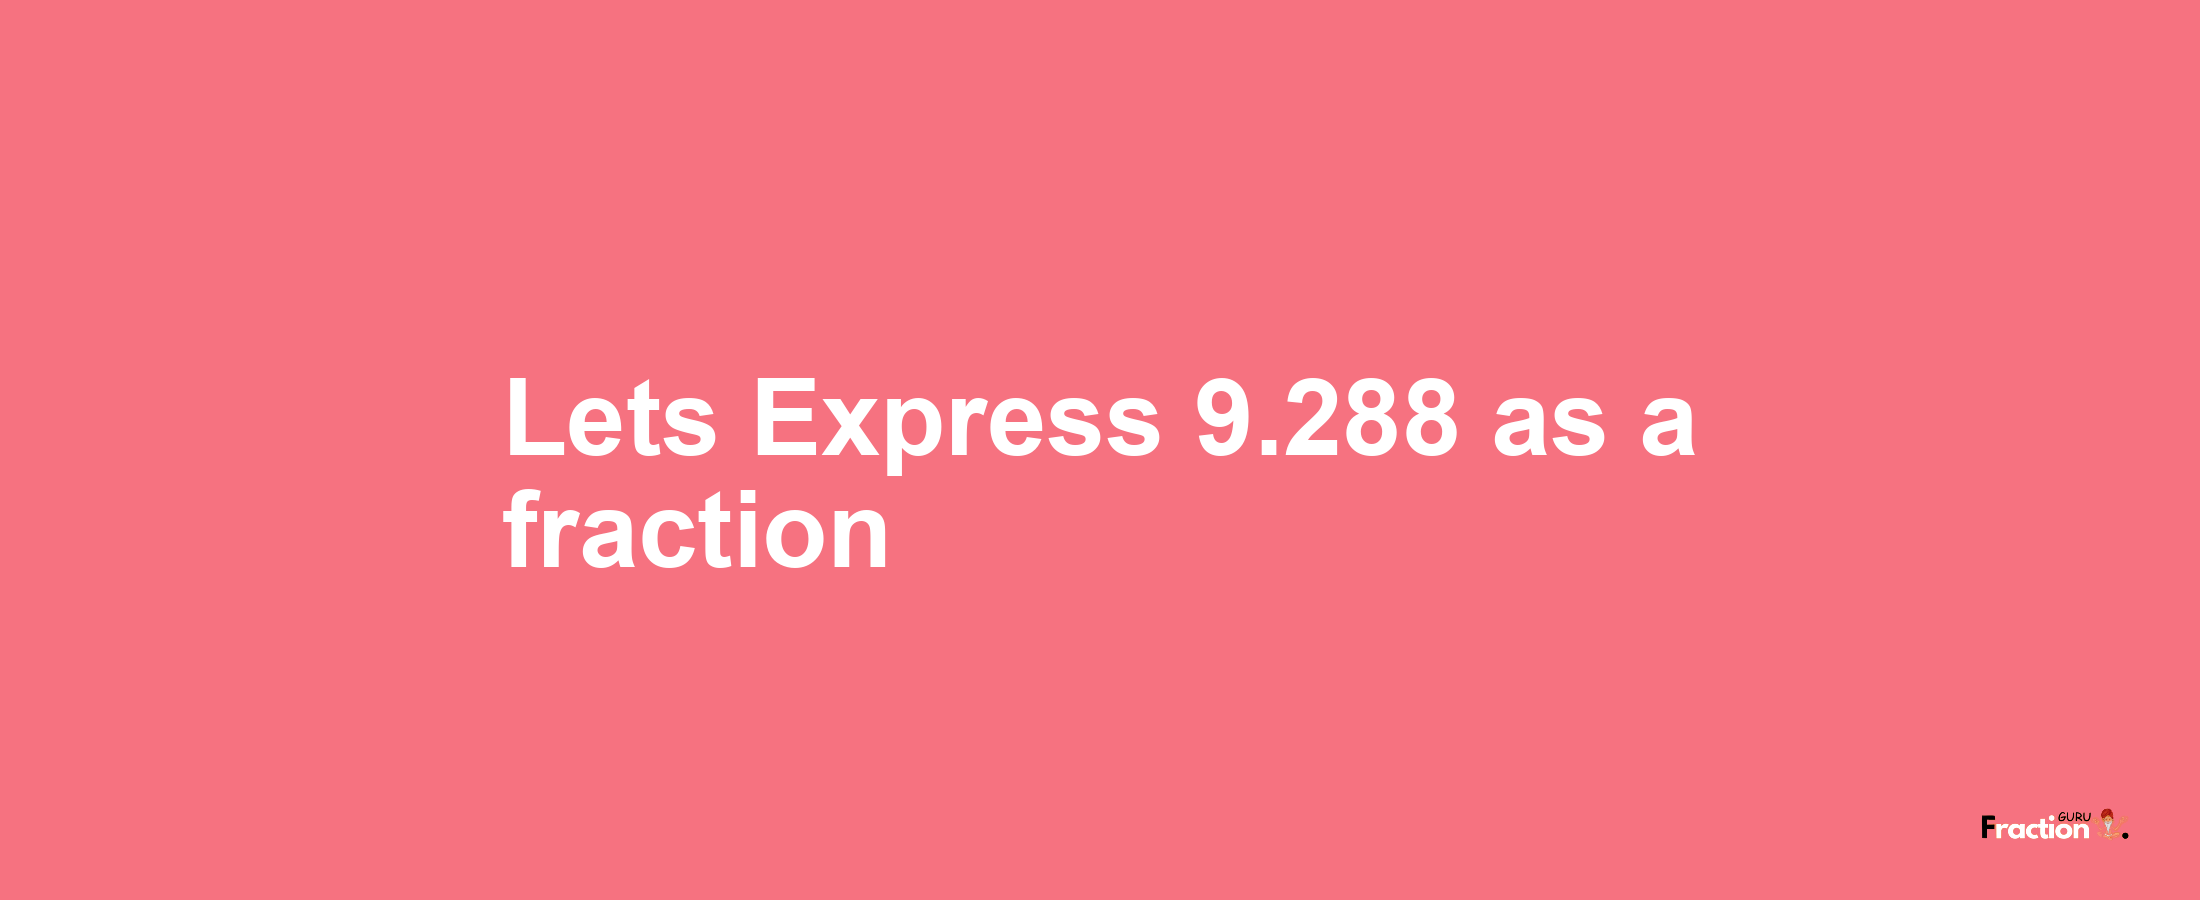 Lets Express 9.288 as afraction